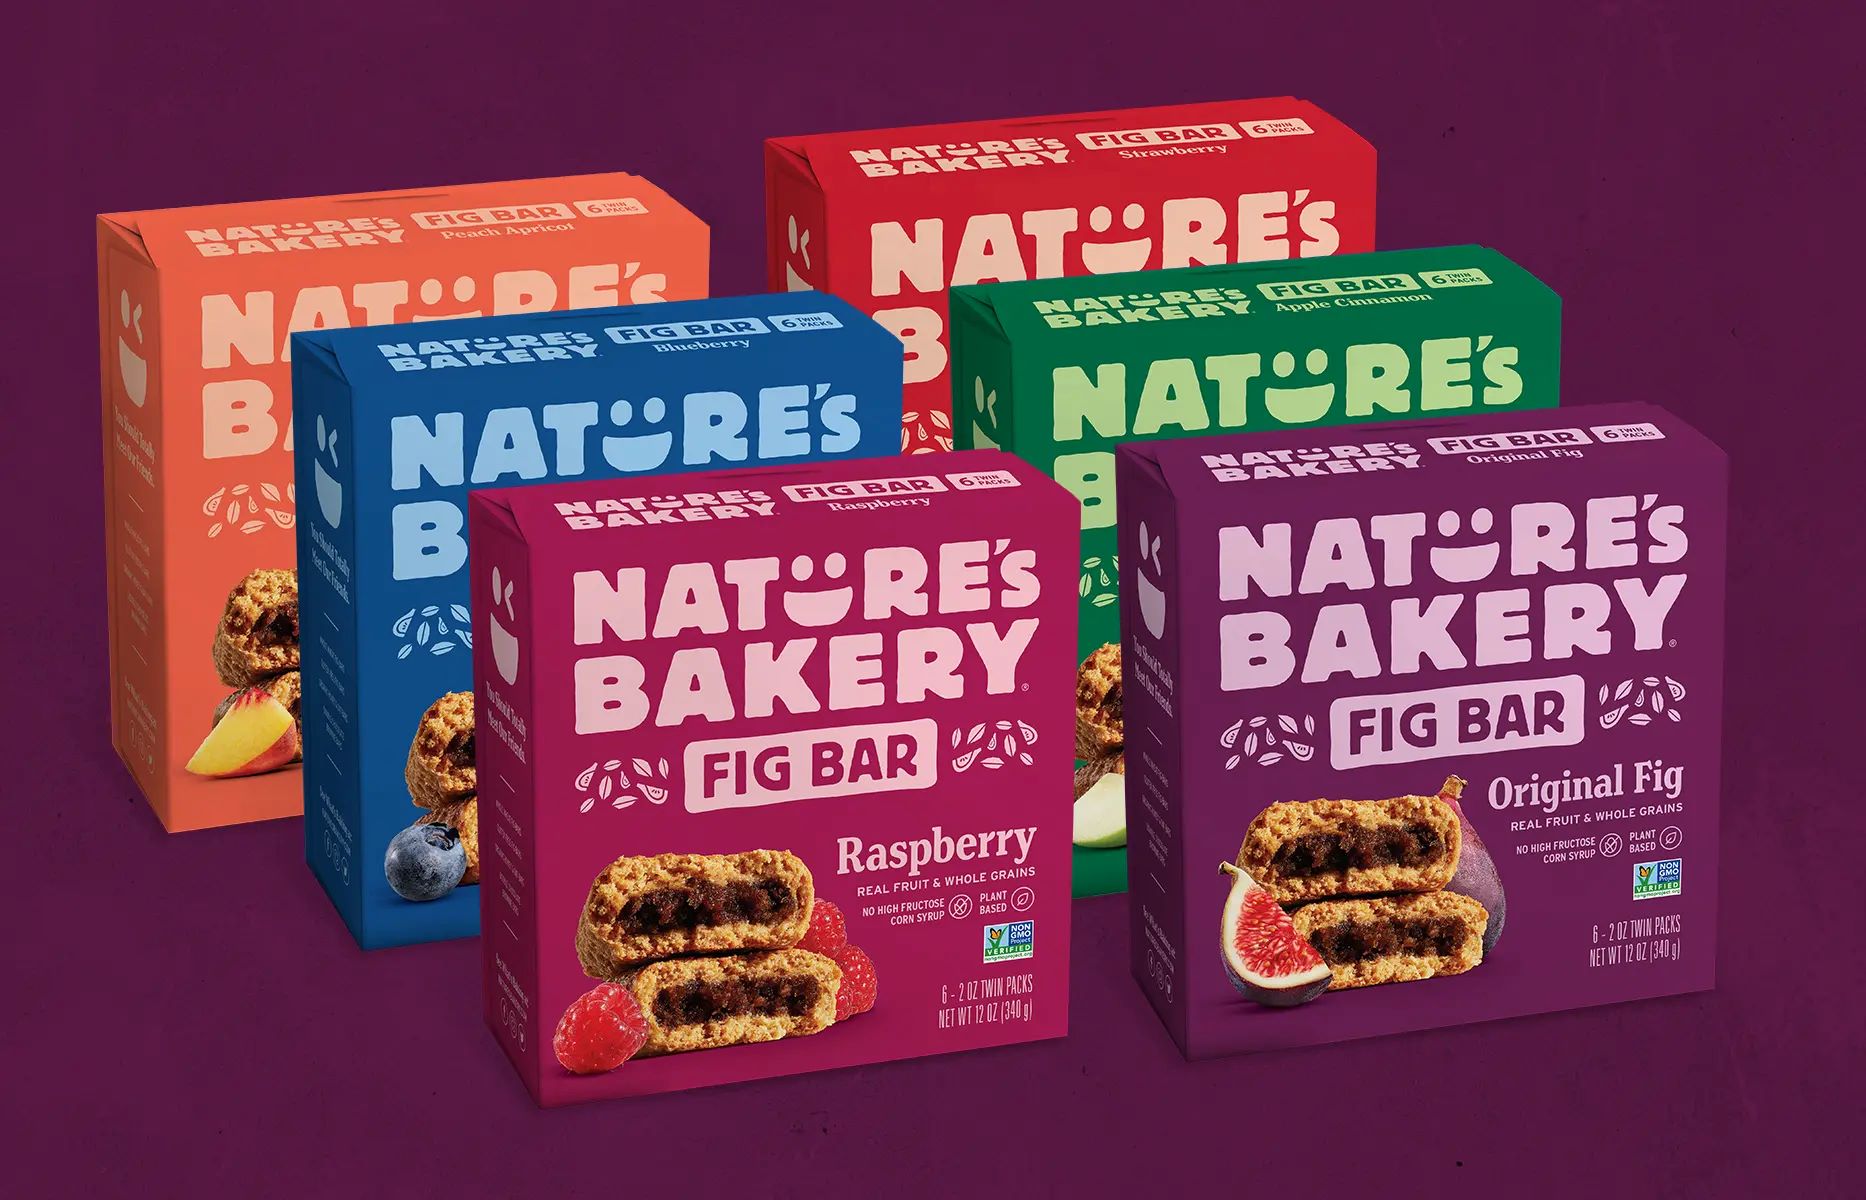 20-natures-bakery-fig-bar-nutrition-facts